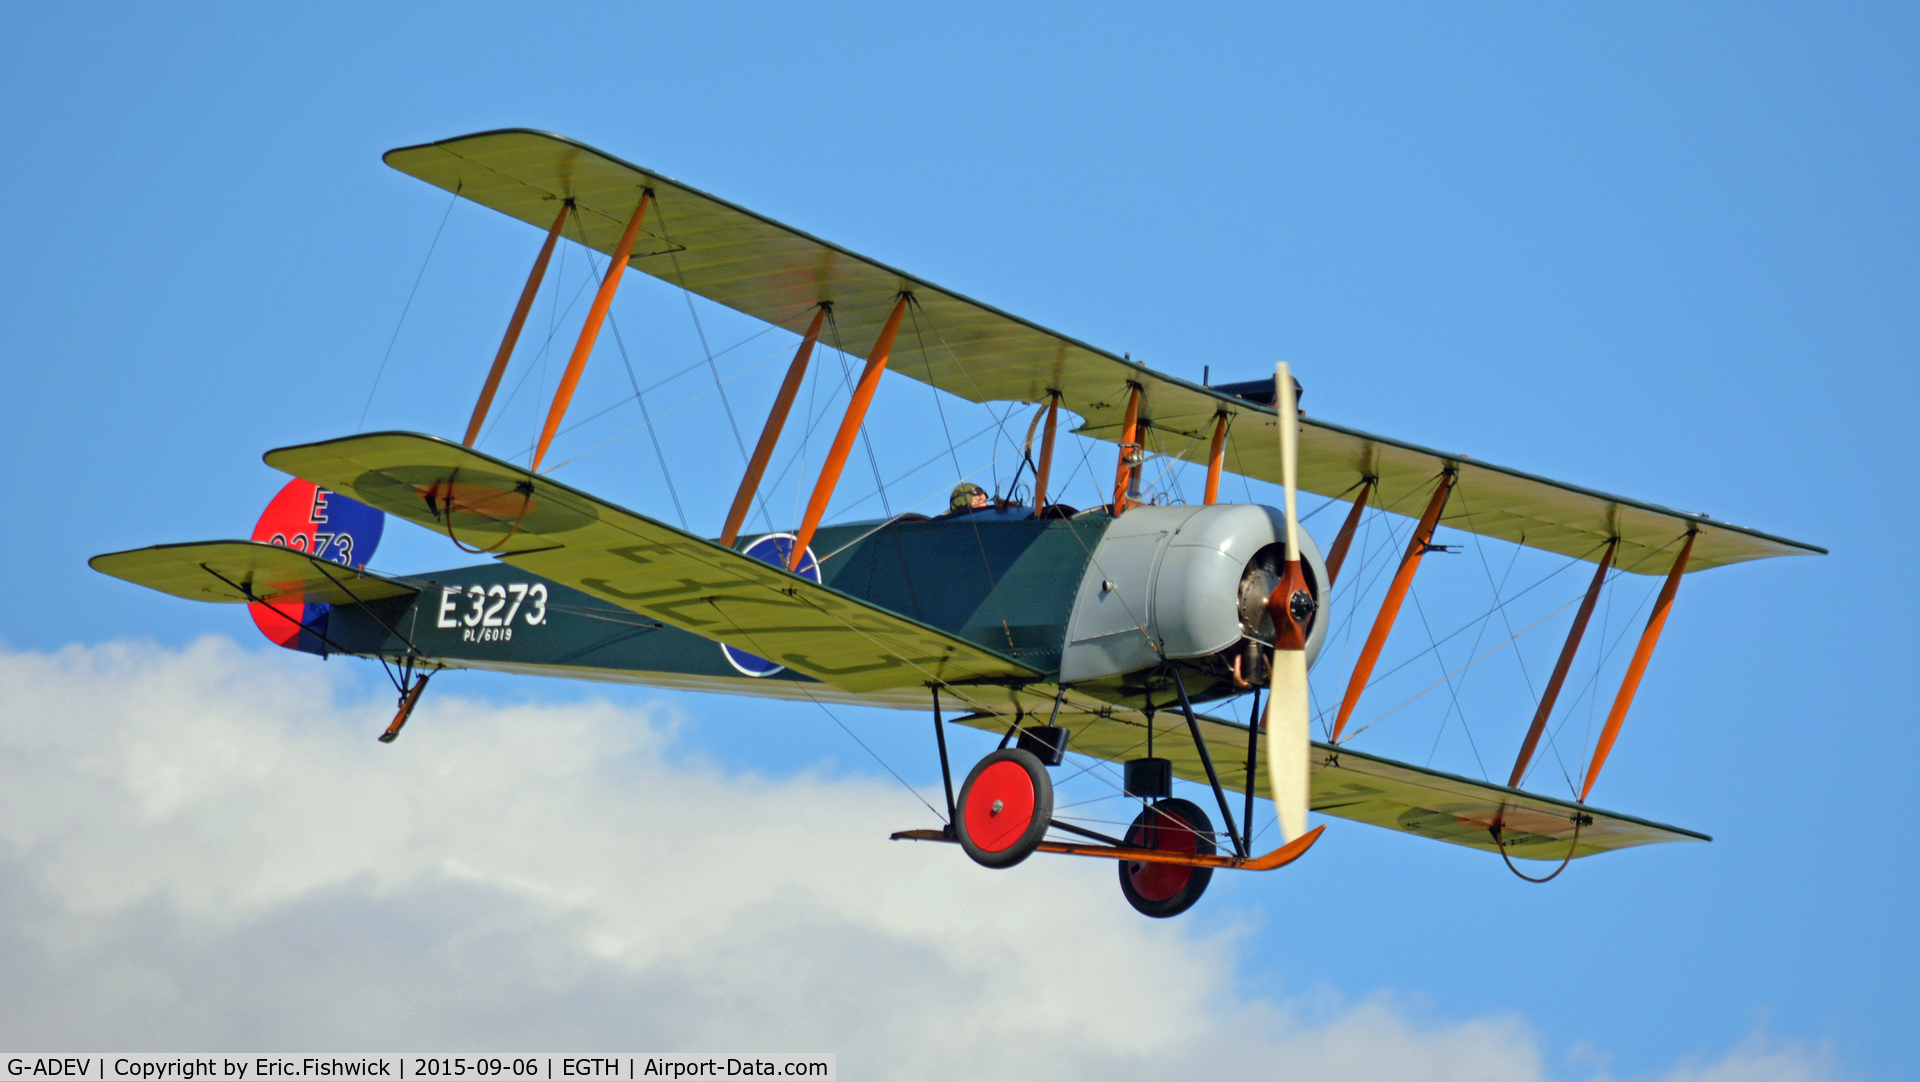 G-ADEV, 1918 Avro 504K C/N R3/LE/61400, 43. E3273 in display mode at The Shuttleworth Pagent Airshow, Sep. 2015.